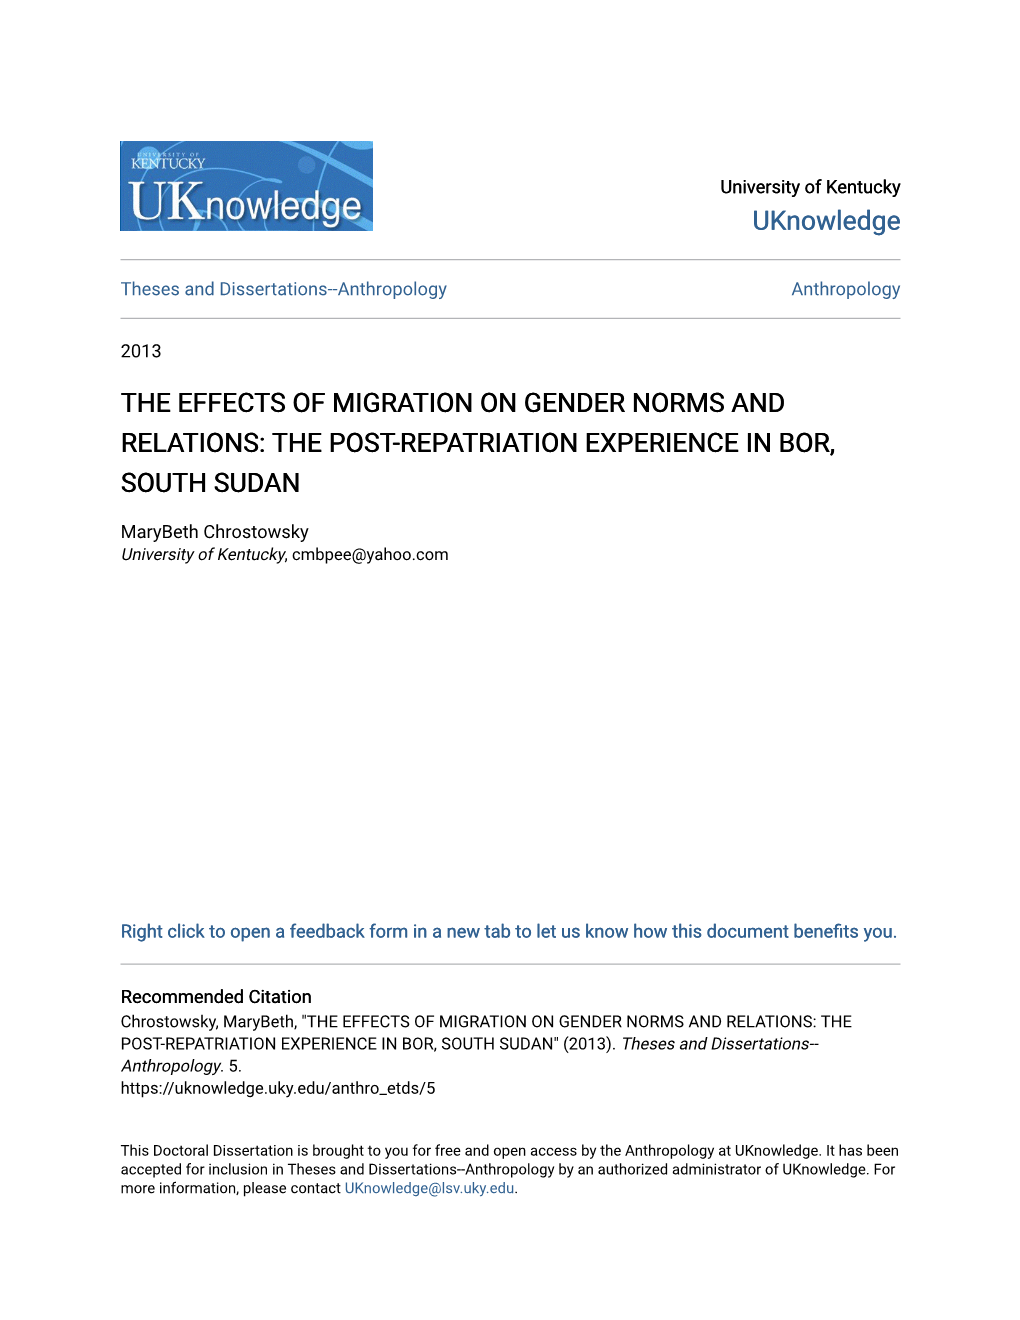 The Effects of Migration on Gender Norms and Relations: the Post-Repatriation Experience in Bor, South Sudan